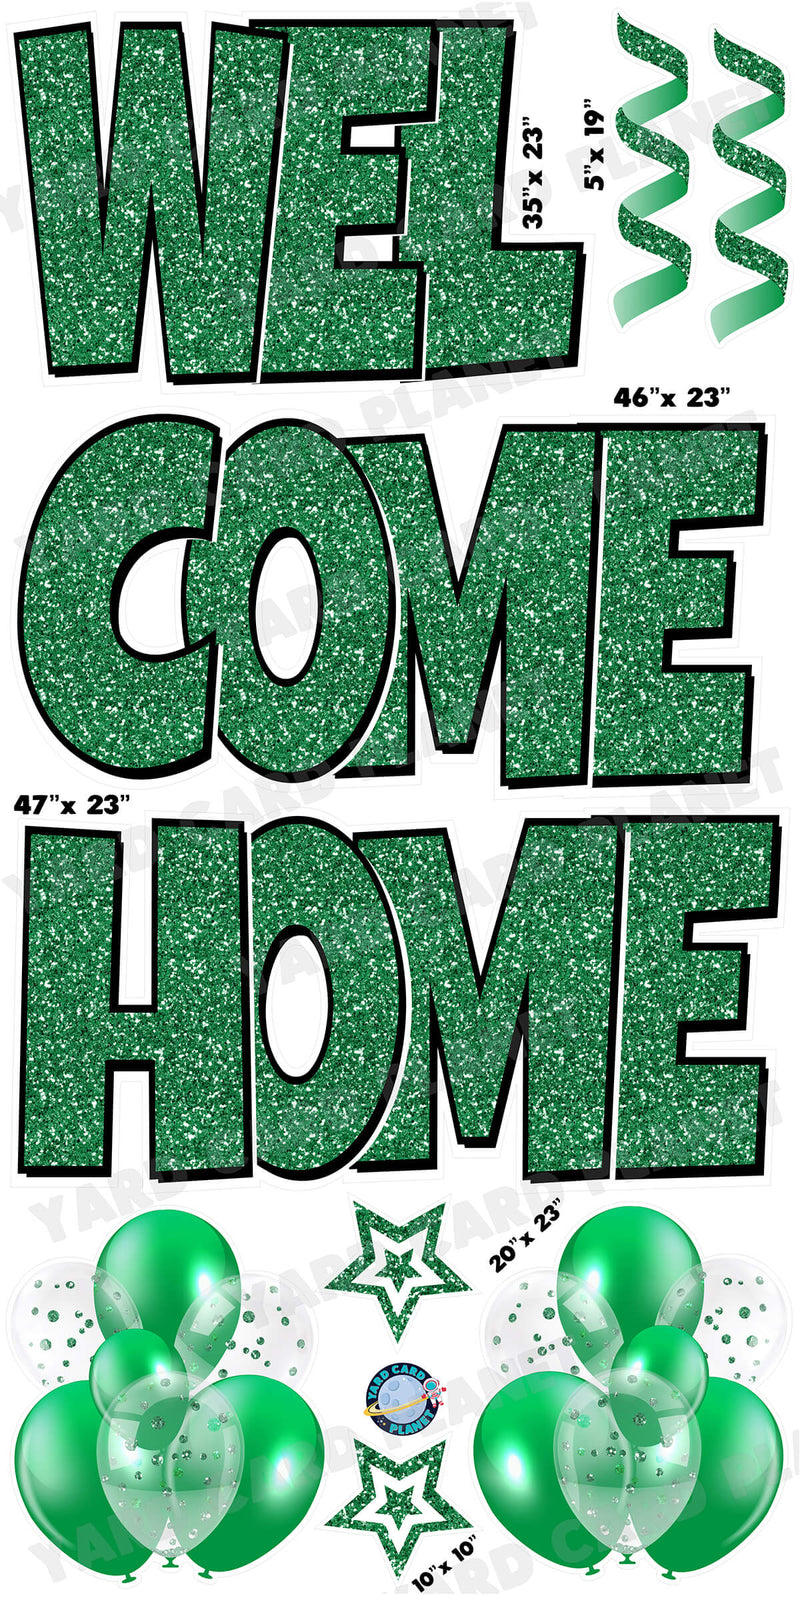 Large 23" Welcome Home Yard Card EZ Quick Sets in Luckiest Guy Font and Flair in Green Glitter Pattern